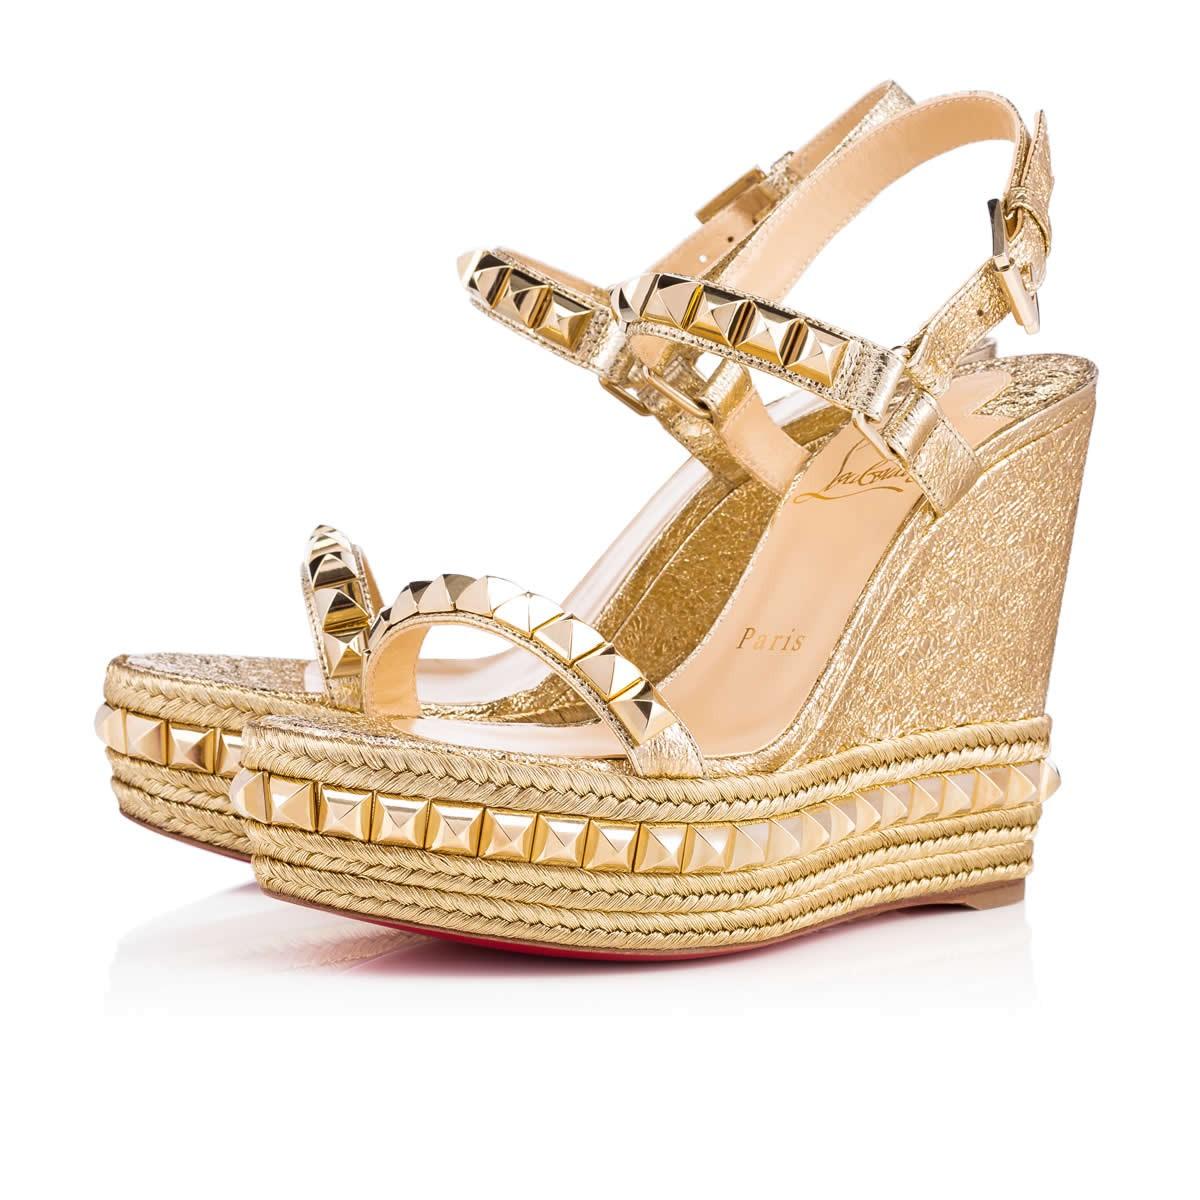 Lyst - Christian Louboutin Cataclou140mm Wedge Sandals in Brown